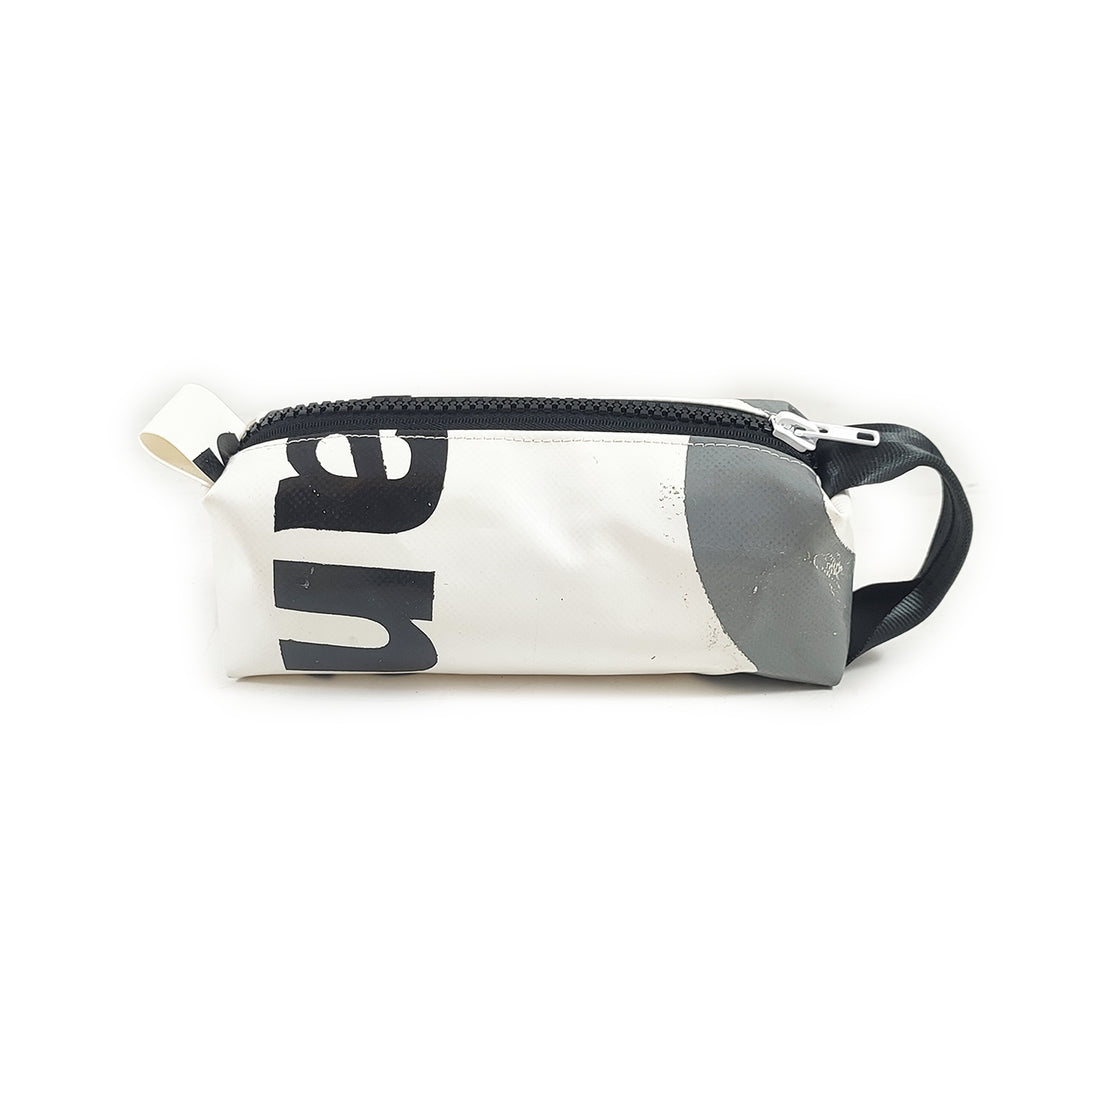 J-Pouch | 003 - Pencil Case and Toiletry Bag Made From UpCycled Materials